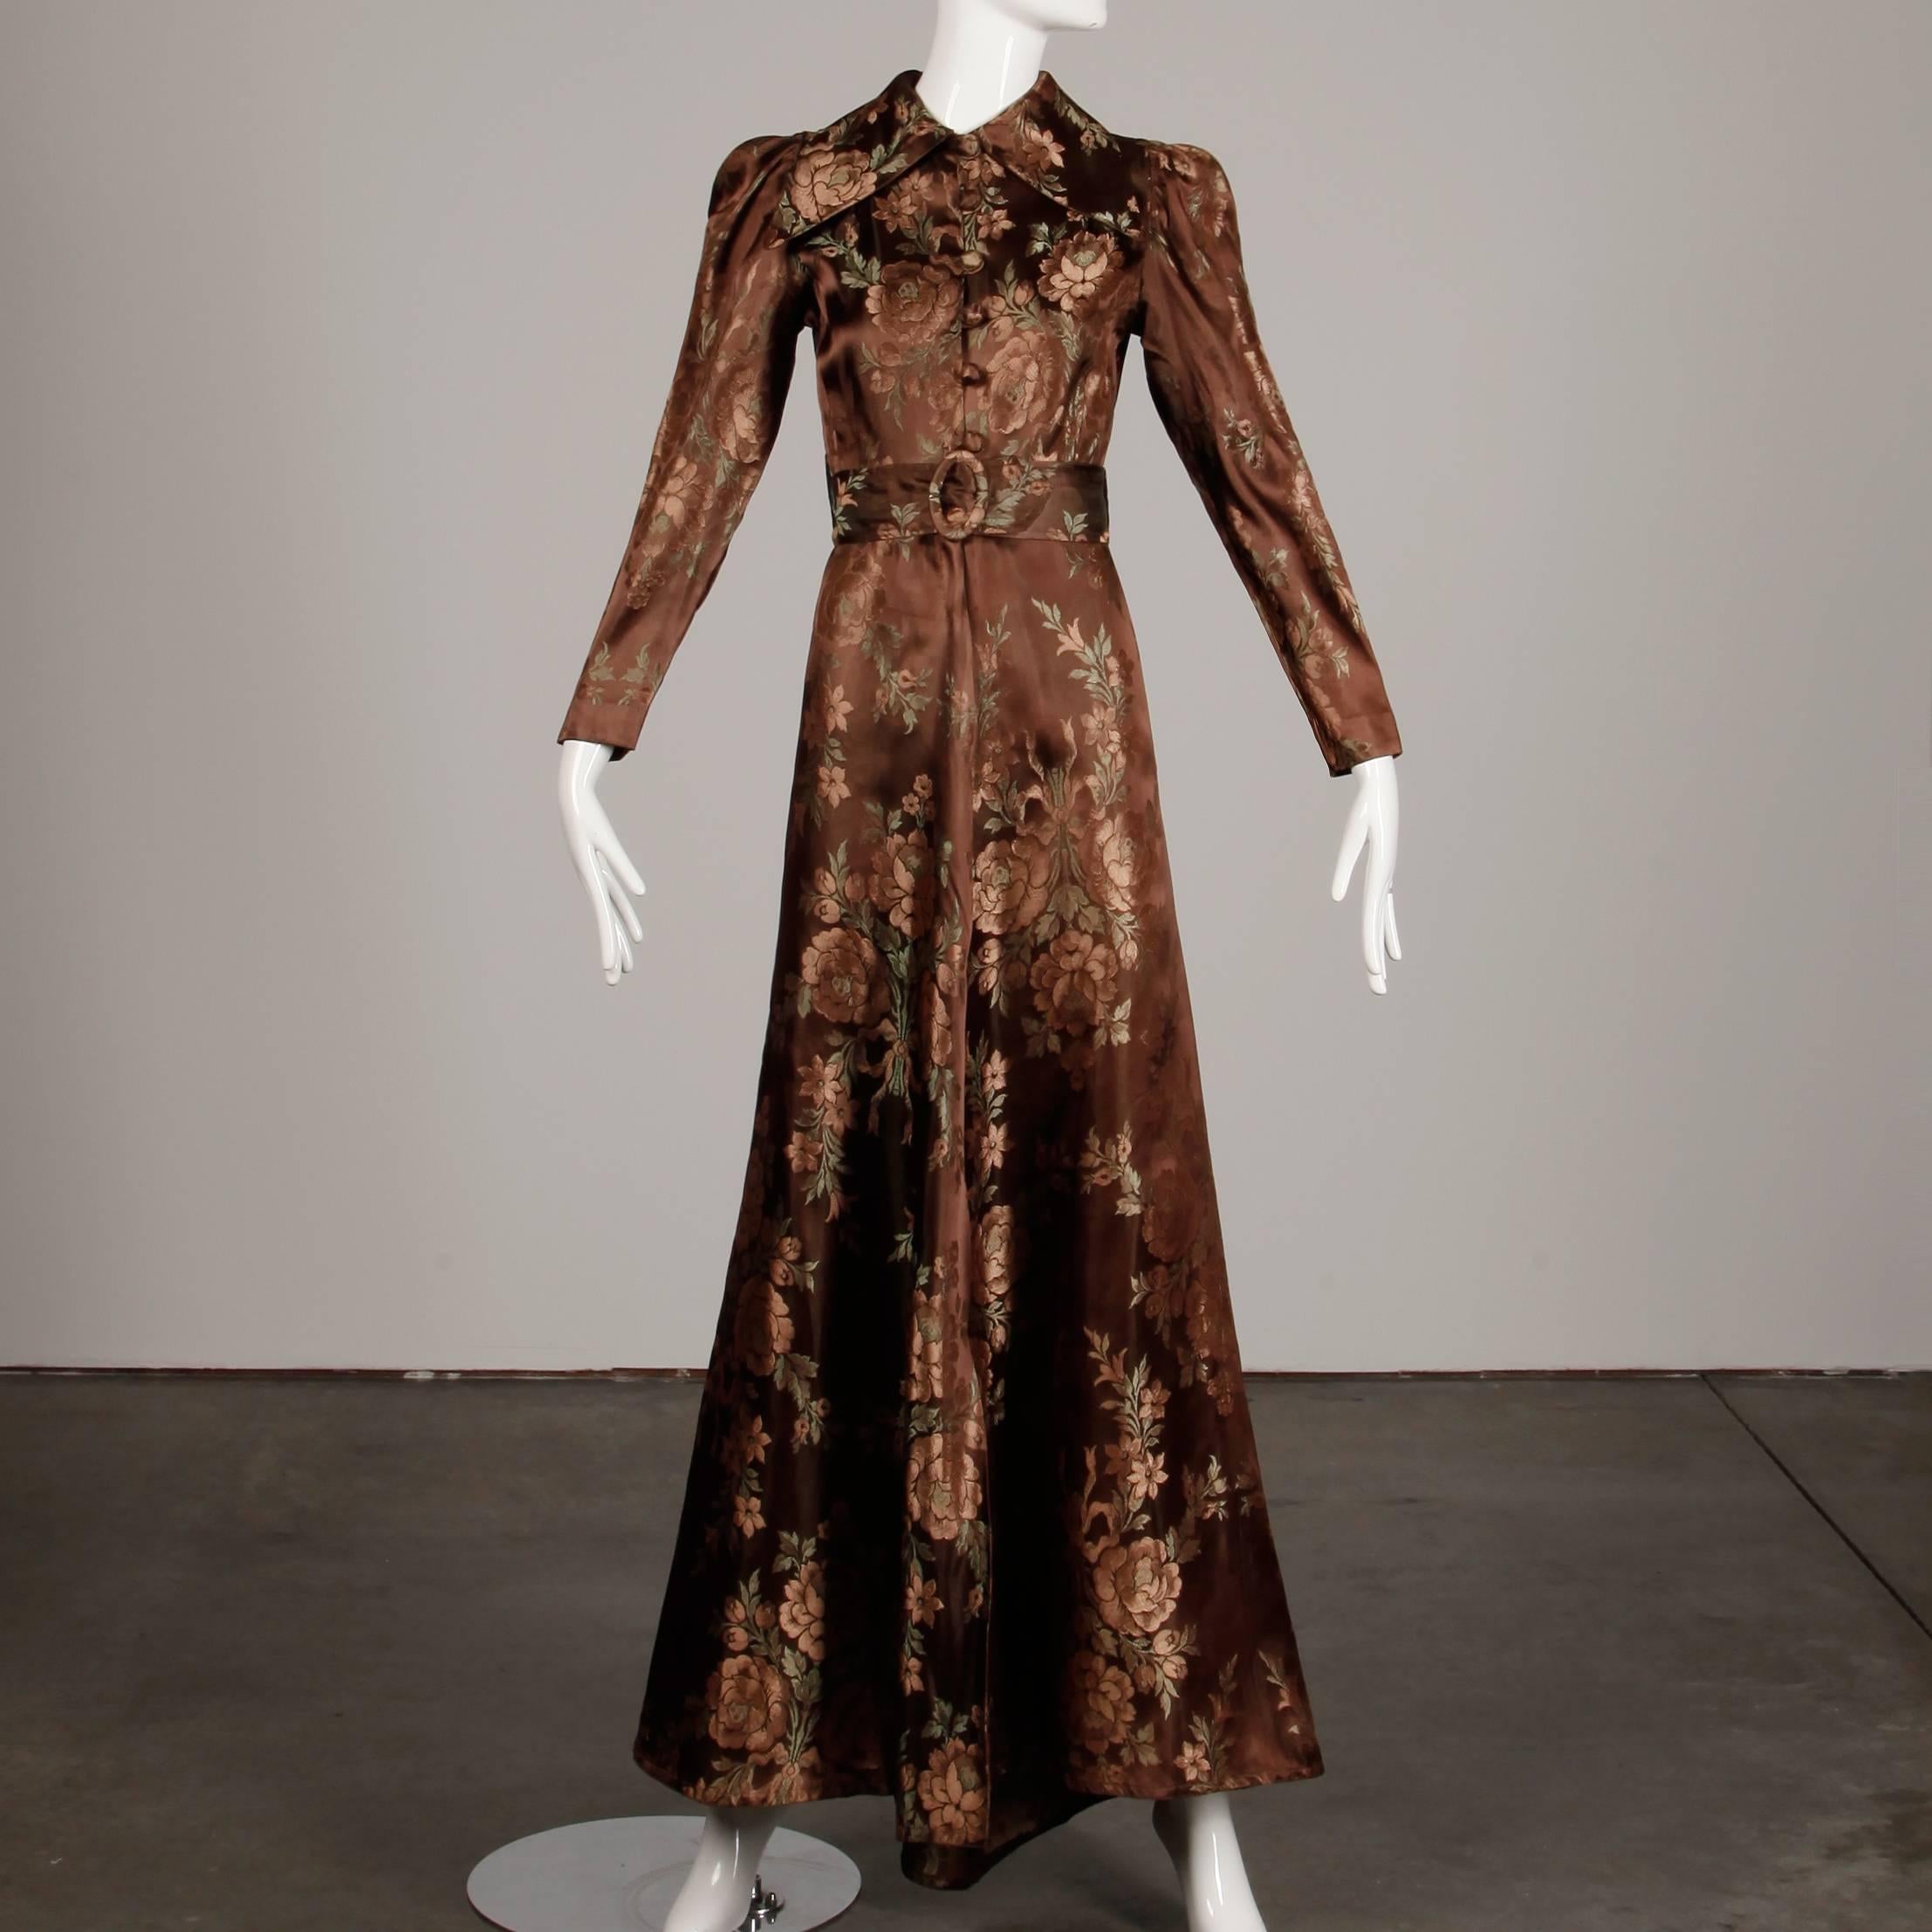 Incredible vintage 1940s copper brown floral jacquard house coat or robe with bold shoulders and matching belt. Unlined with front hook and button closure and a high/low hem. Fits like a modern size small. The bust measures 34